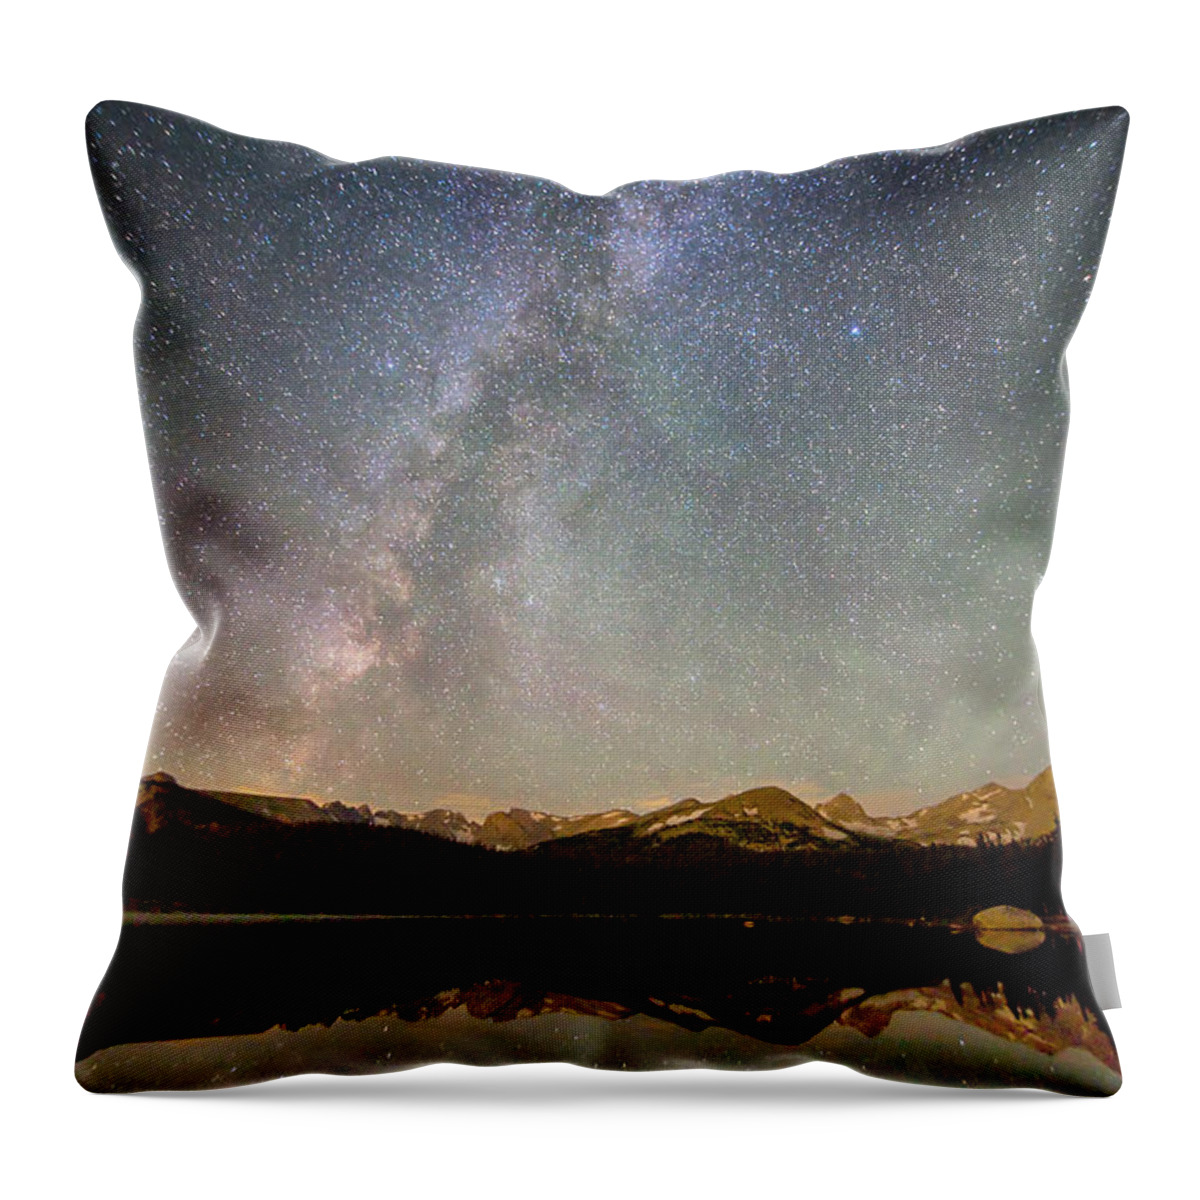 Milky Way Throw Pillow featuring the photograph Milky Way Over The Colorado Indian Peaks by James BO Insogna